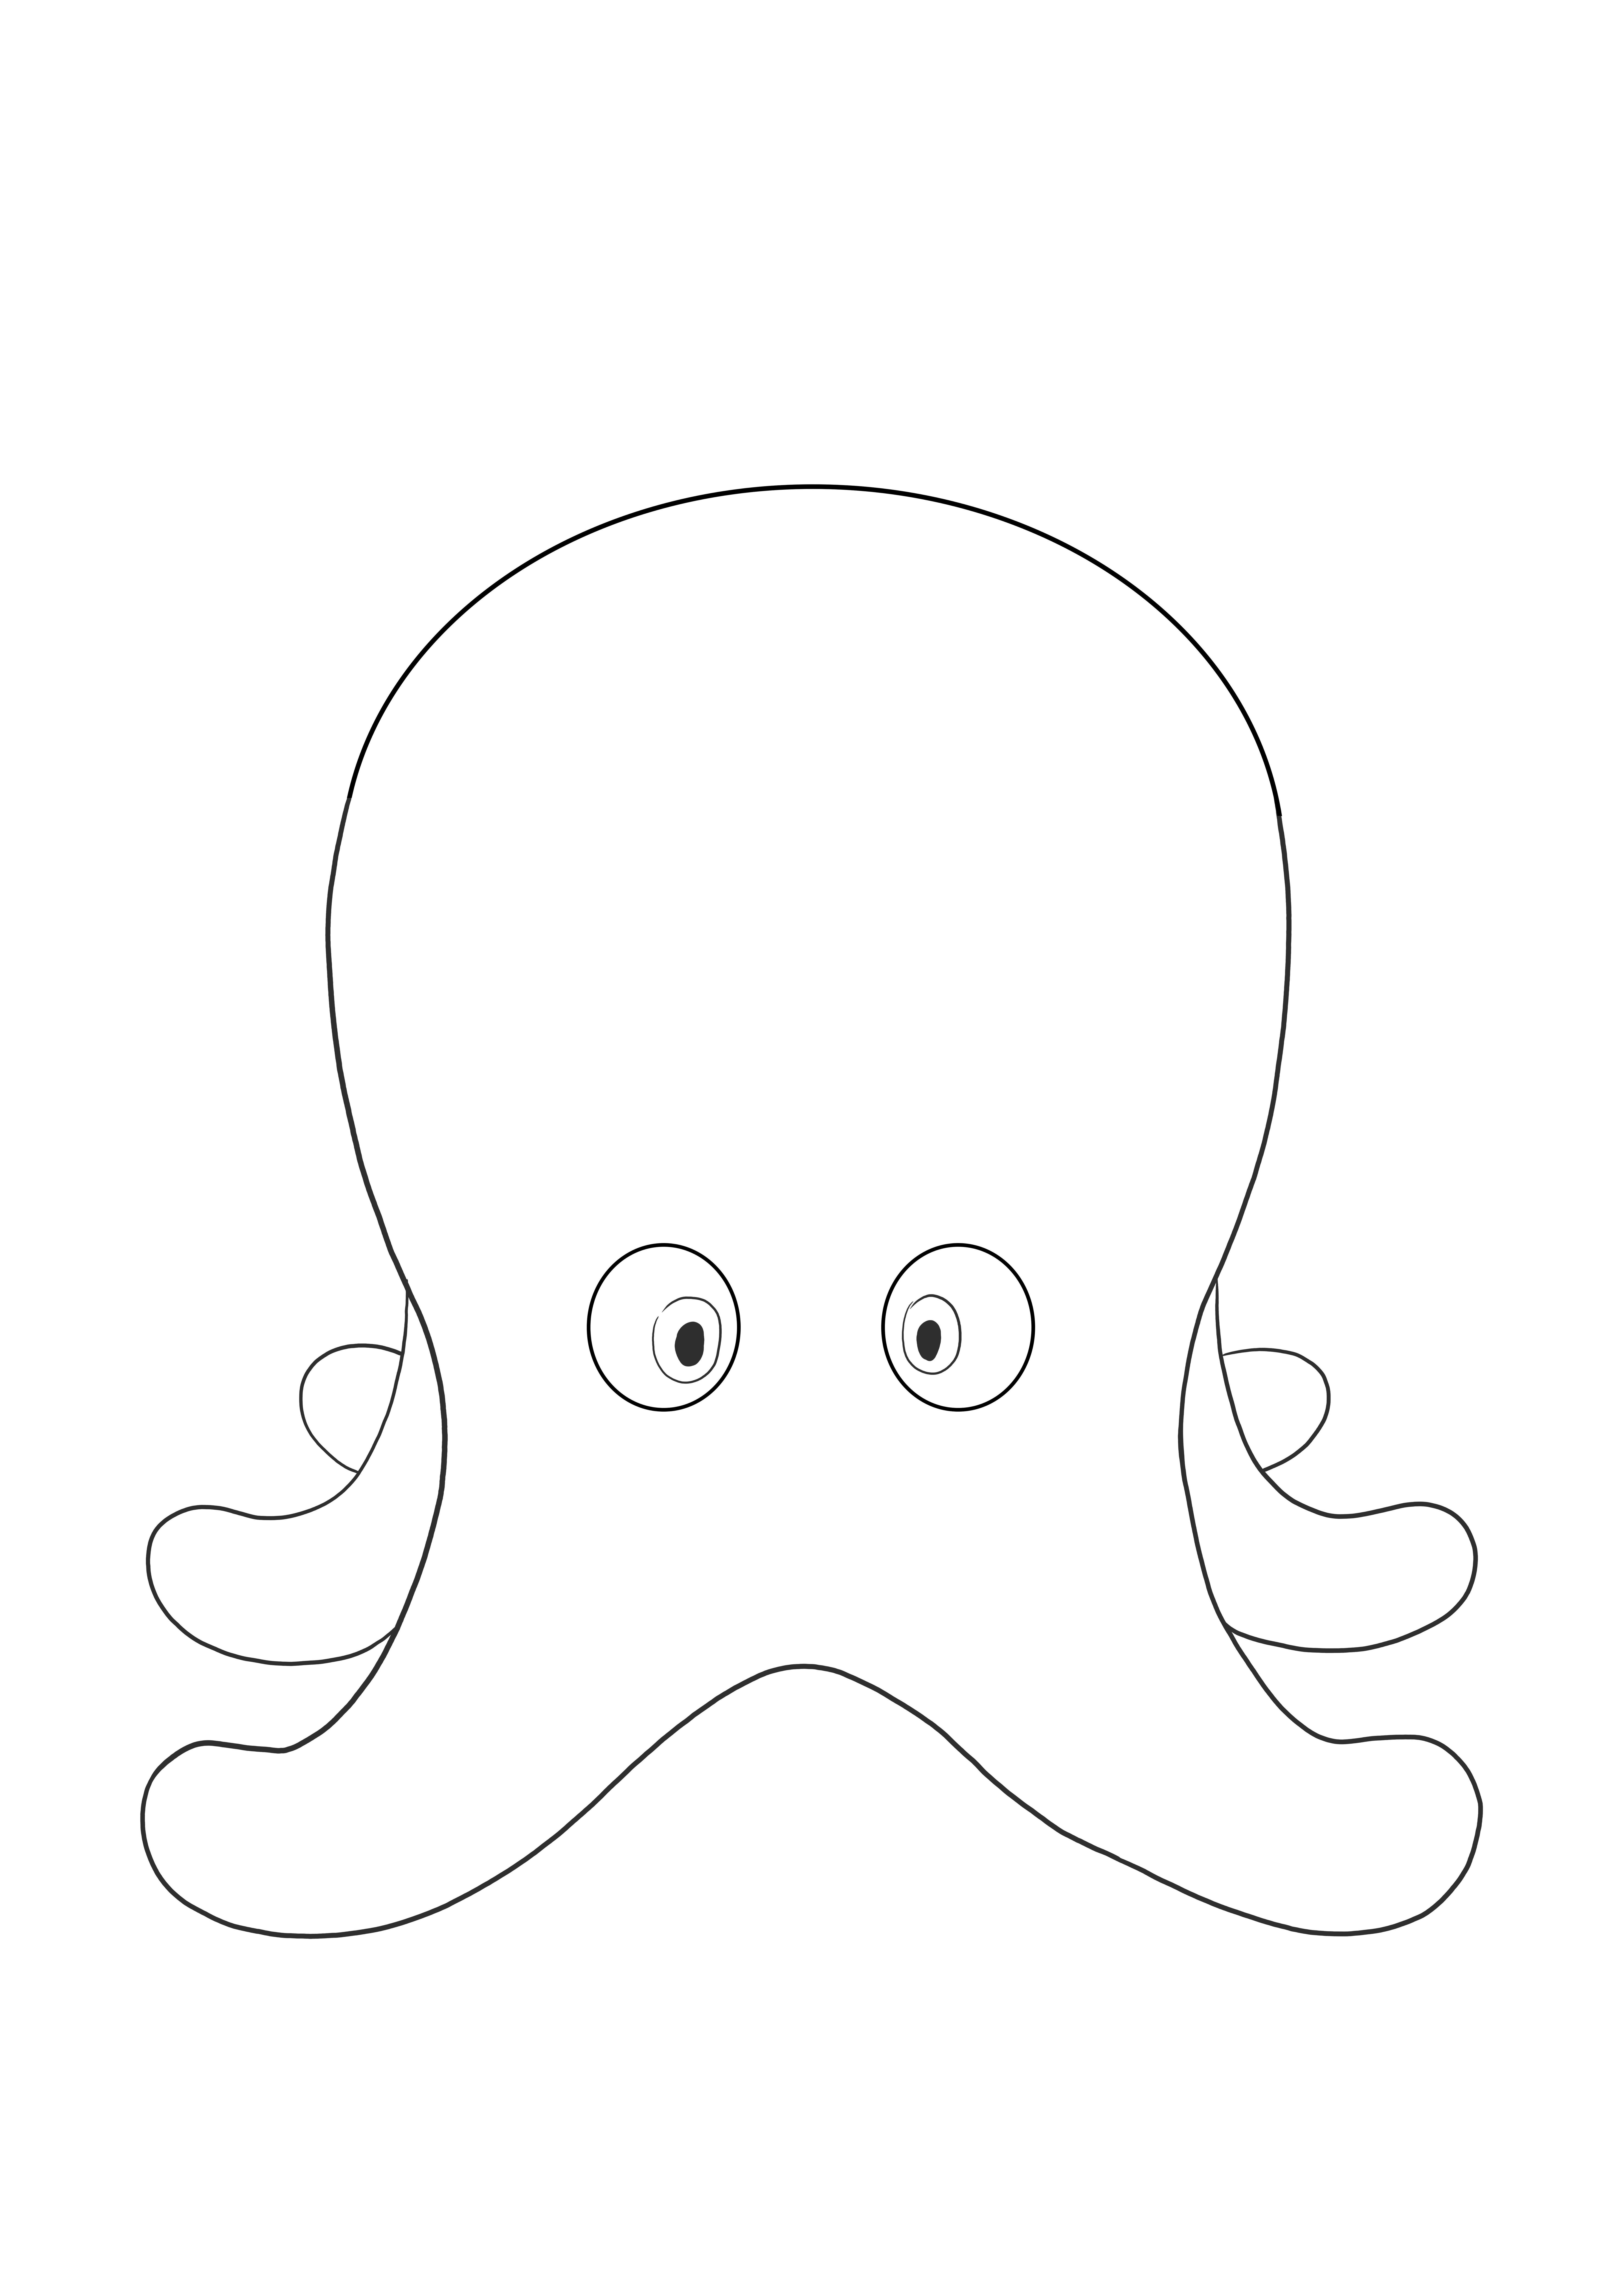 Simple and easy coloring of an octopus free to download sheet